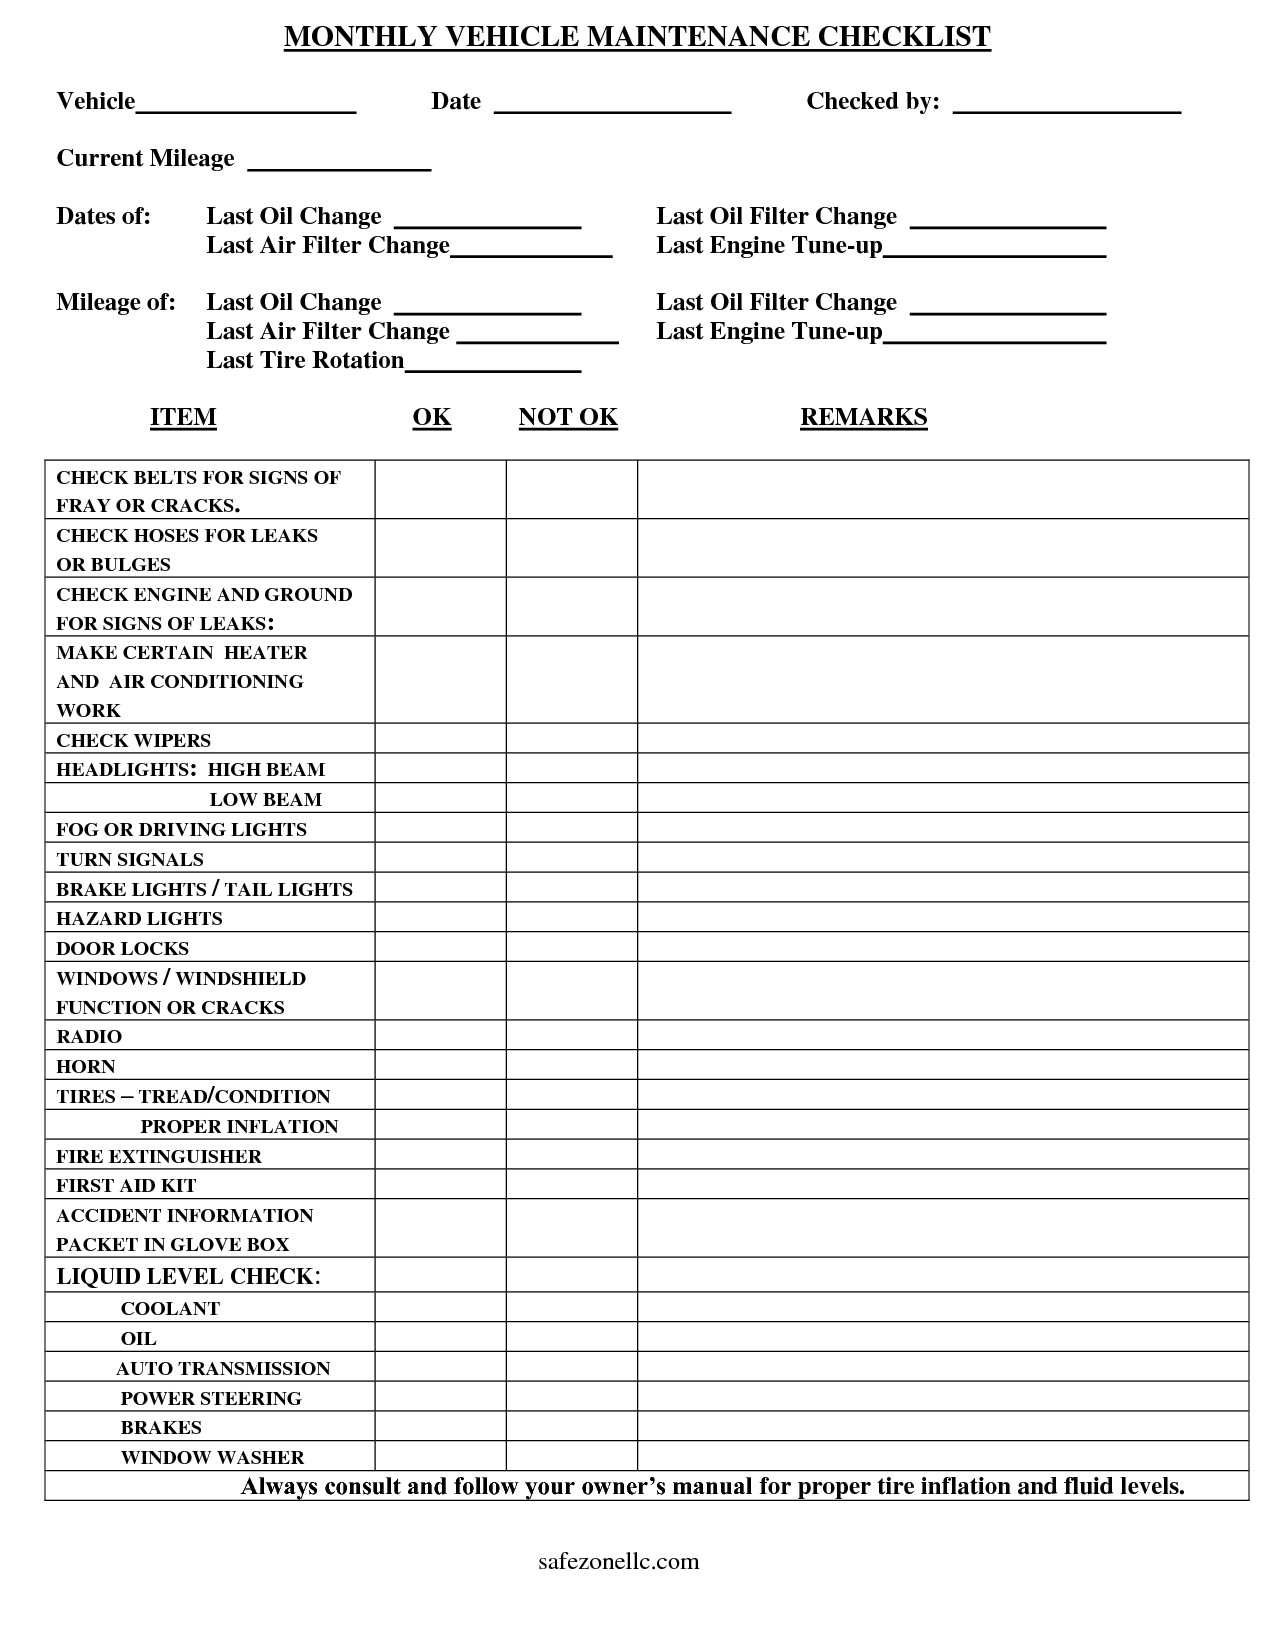 Vehicle Checklist Template MONTHLY VEHICLE MAINTENANCE CHECKLIST Document Maintenance Excel